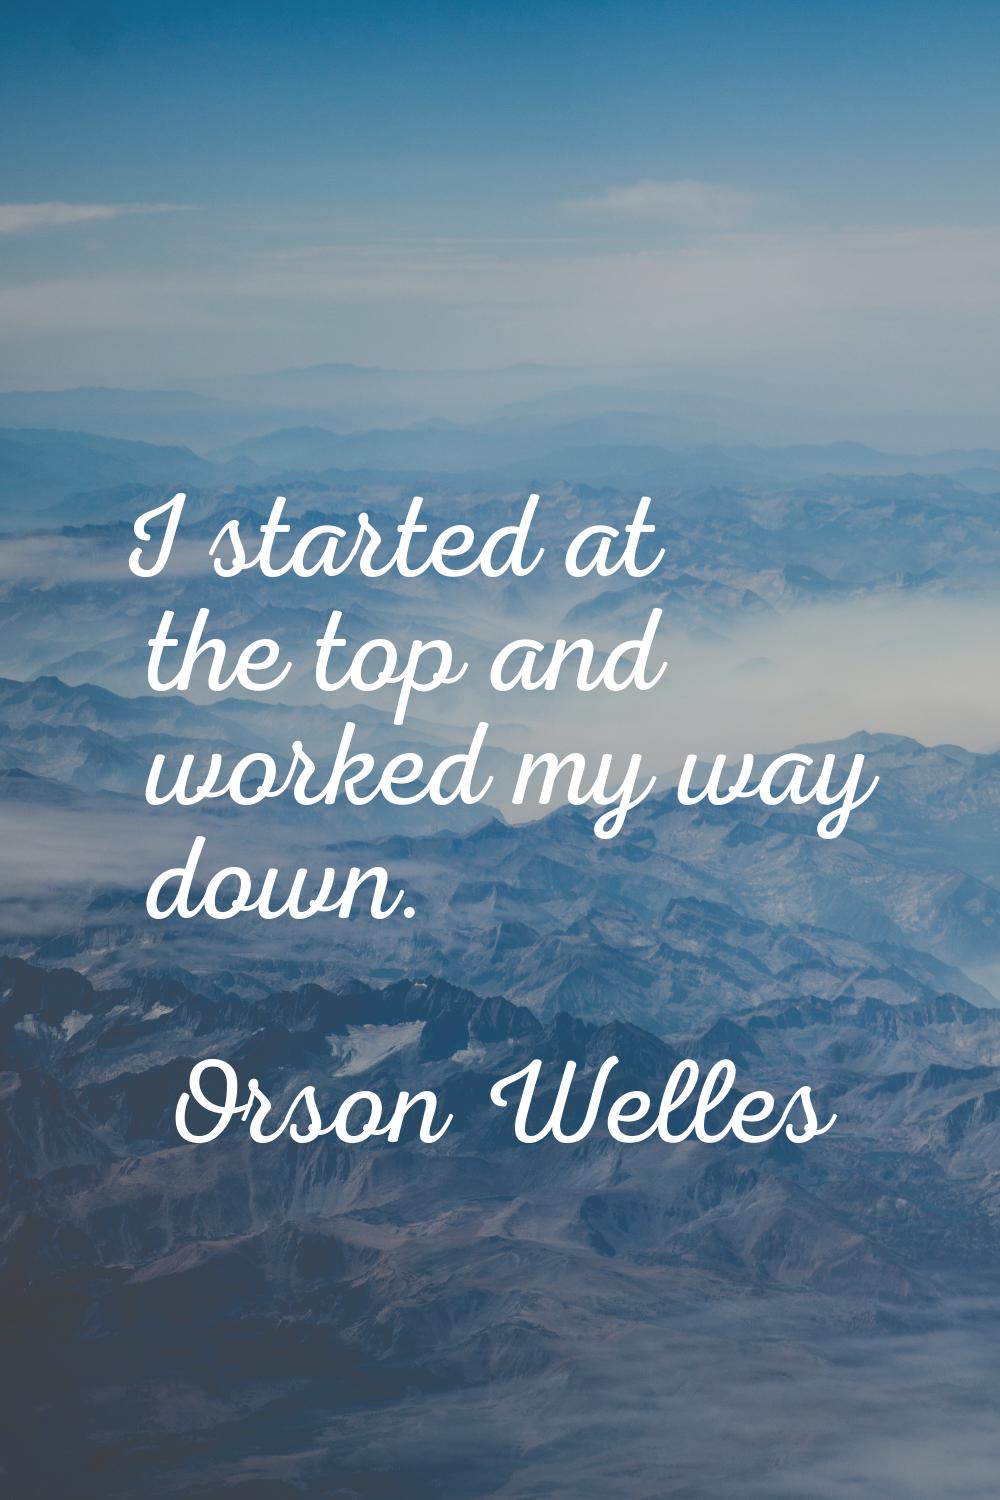 I started at the top and worked my way down.